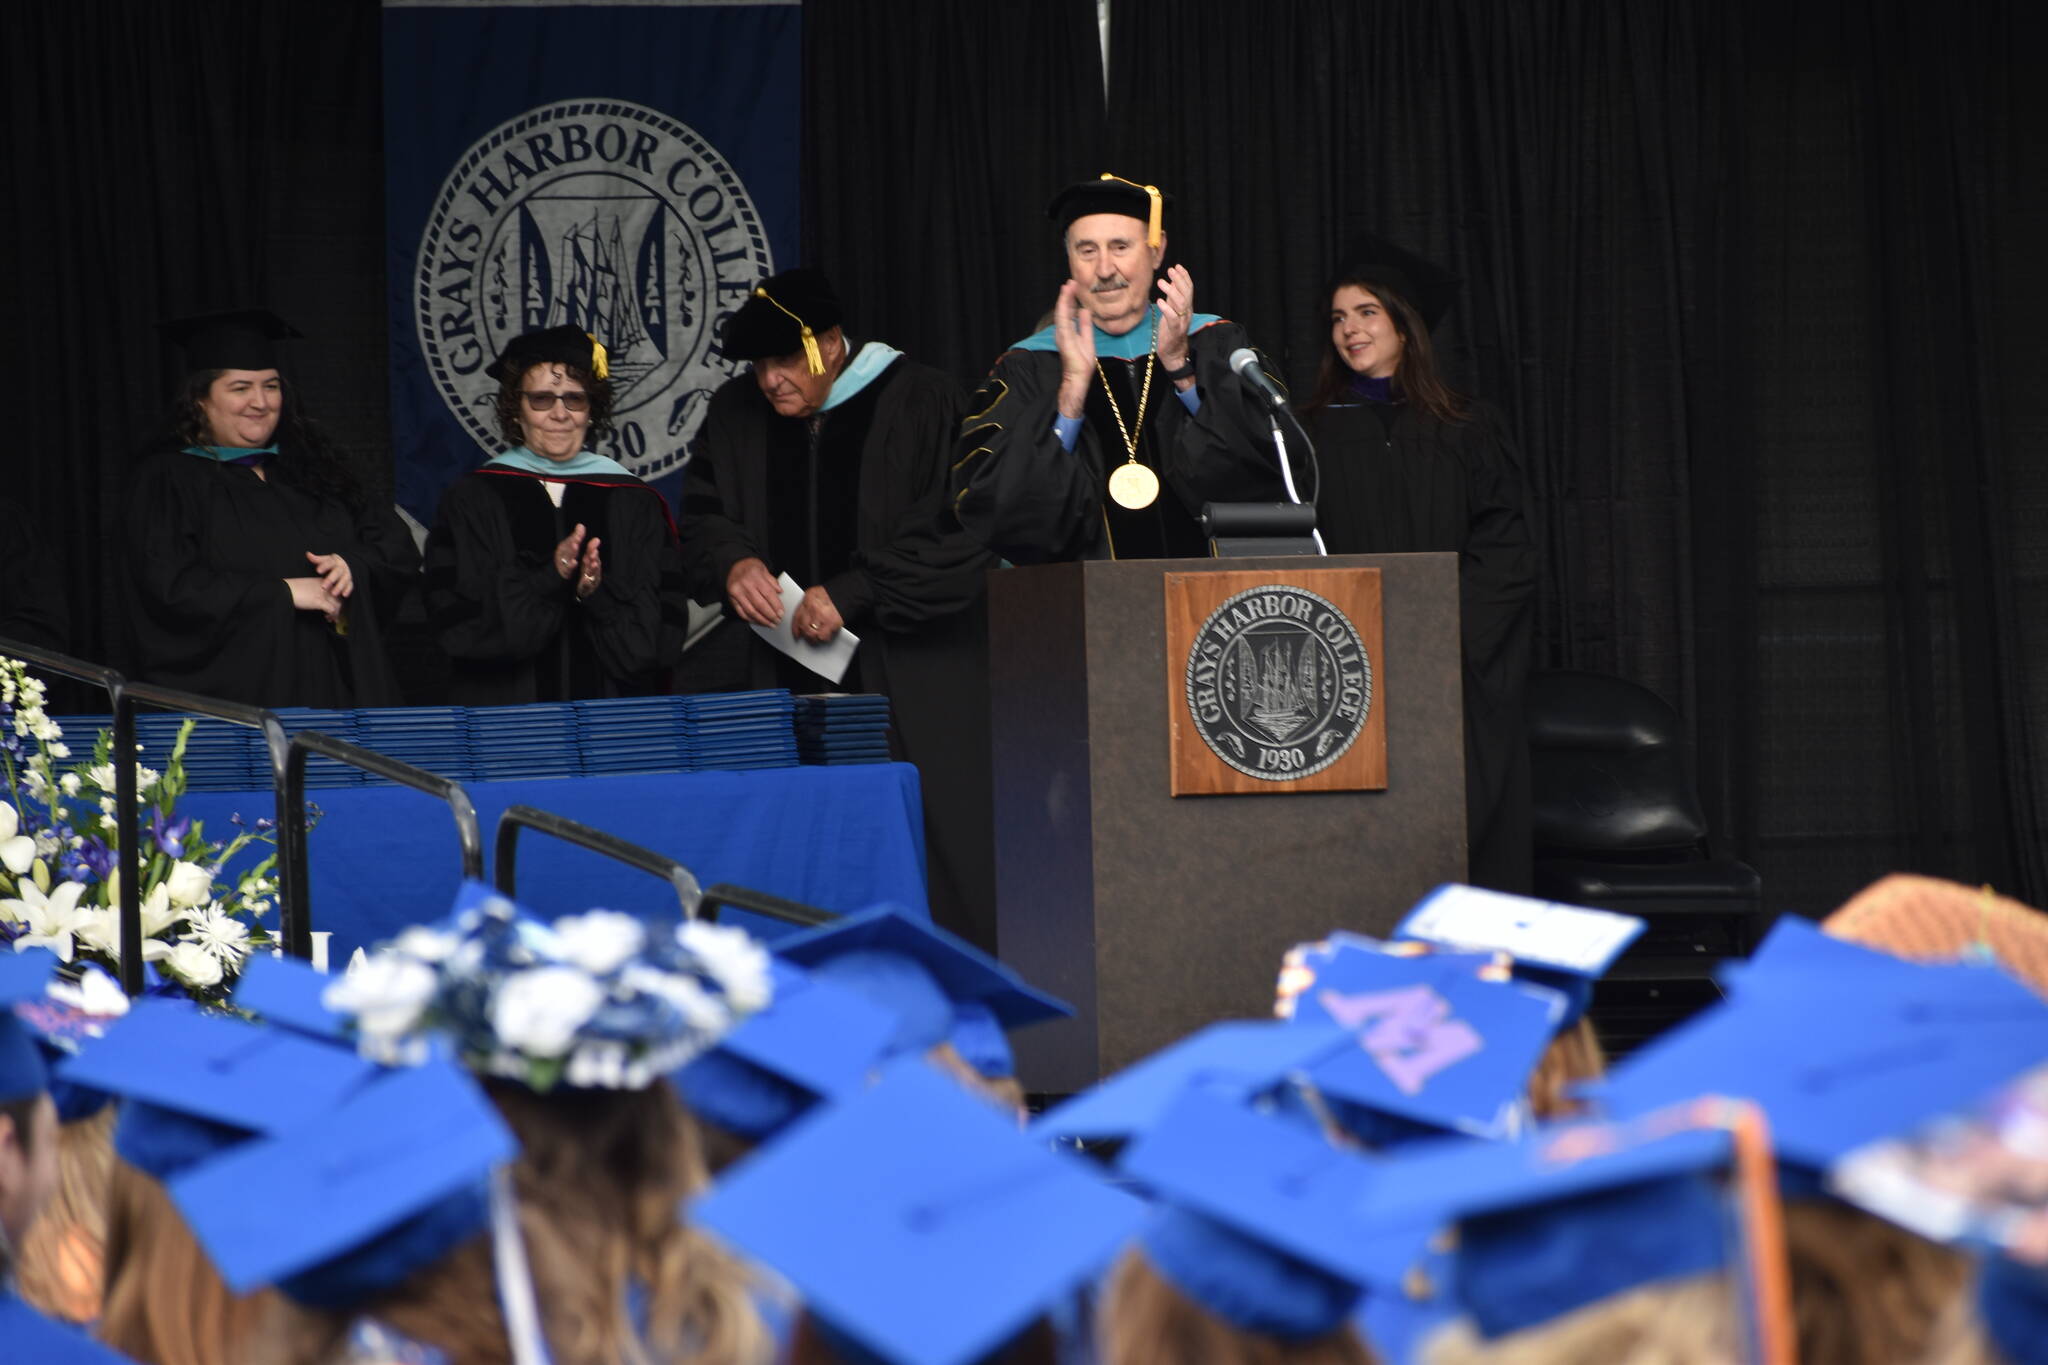 Clayton Franke / The Daily World
Dr. Ed Brewster, outgoing president of Grays Harbor College, claps for graduates at a commencement ceremony Friday, June 23.